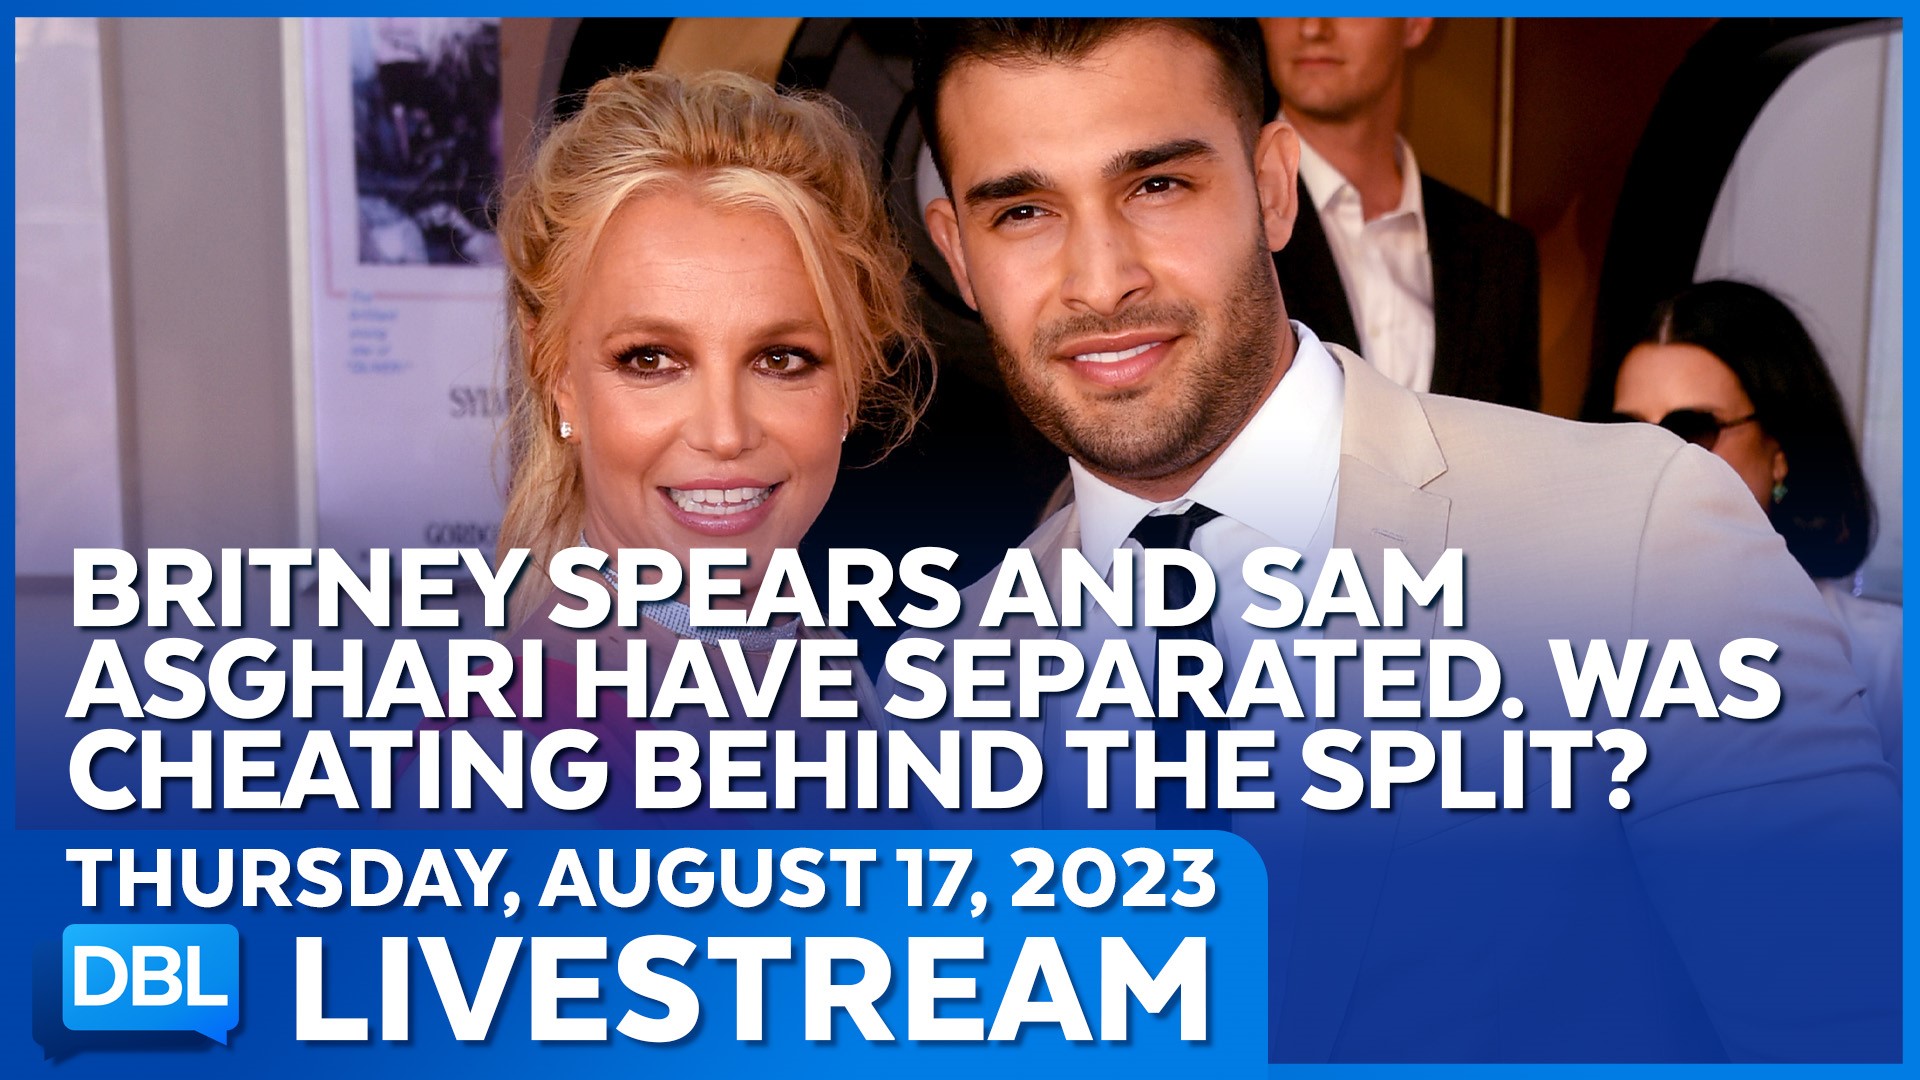 Sam Asghari Divorcing From Britney Spears, Citing Irreconcilable Differences